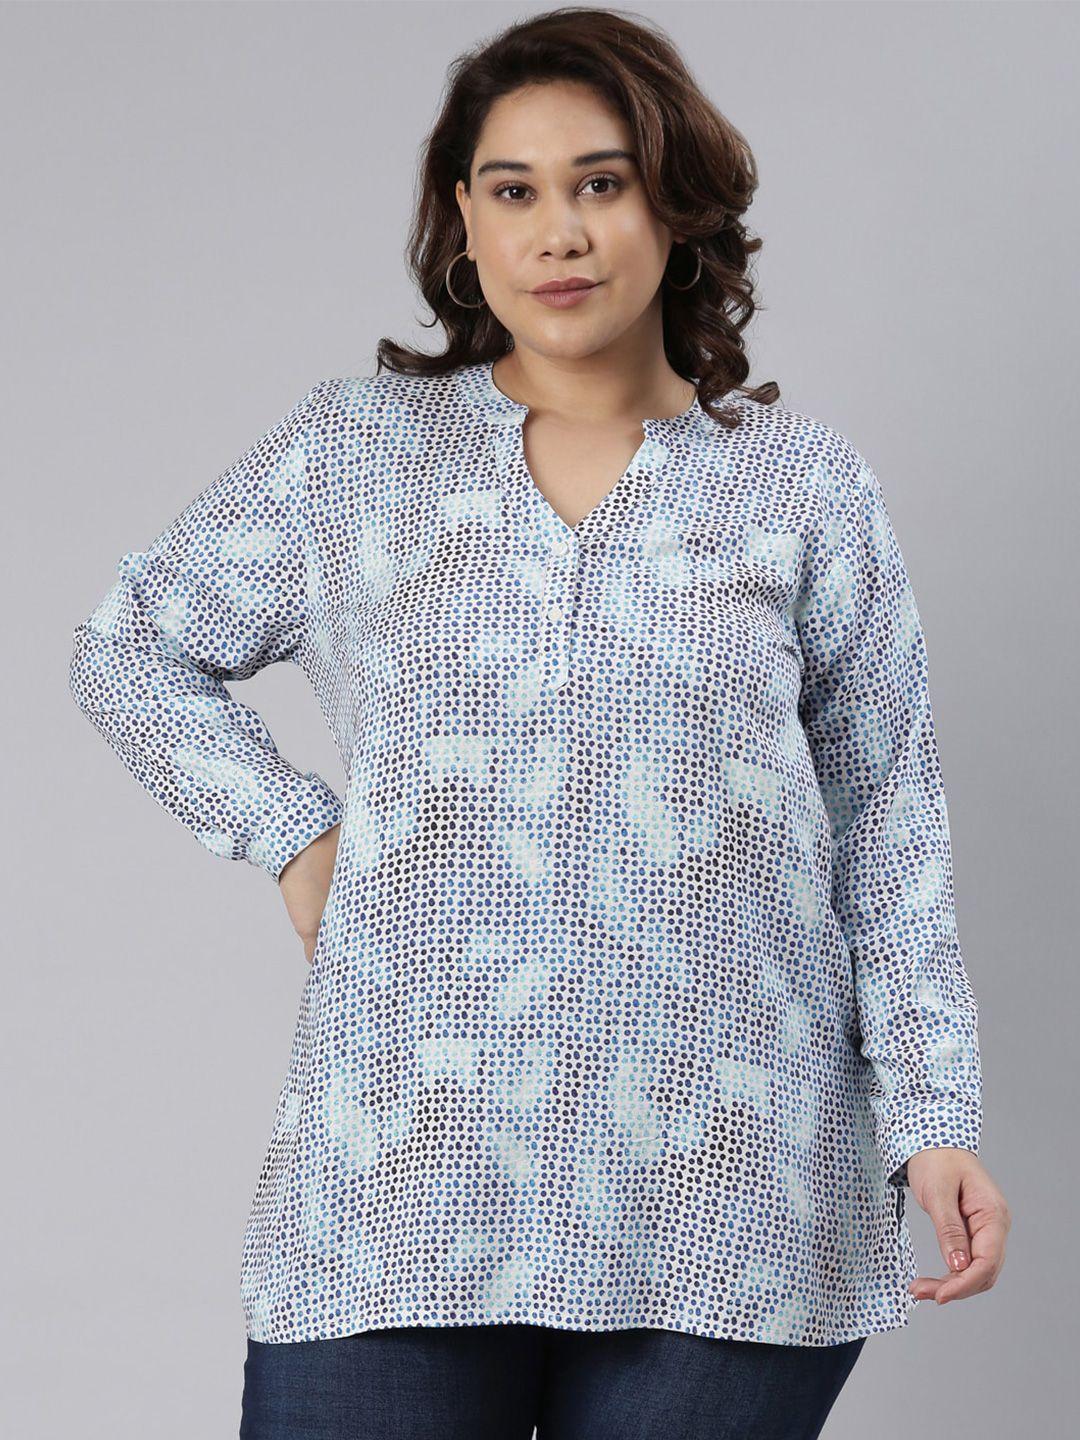 the pink moon plus size geometric print band collar shirt style top